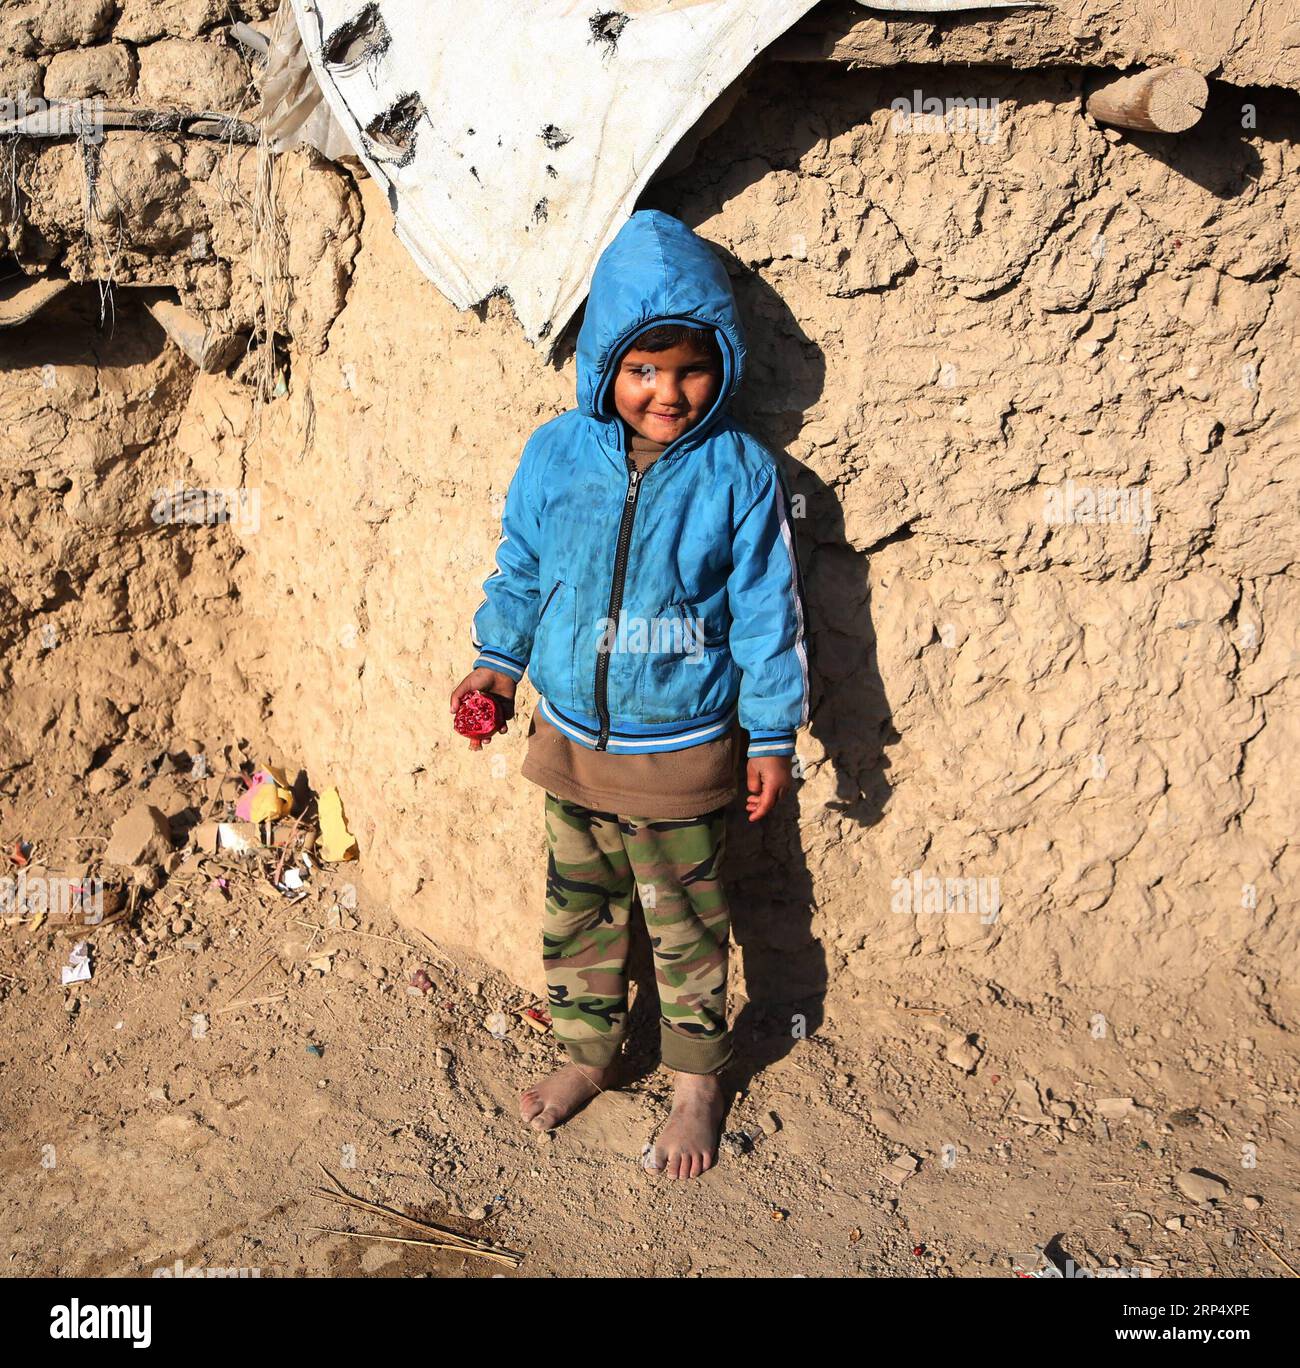 (181120) -- KABUL, Nov. 20, 2018 -- An Afghan child stands outside his mud house on World Children s Day in Kabul, capital of Afghanistan, Nov. 20, 2018. The United Nations Children s Fund (UNICEF) office in Afghanistan said on Monday that about 3.7 million Afghan children have no access to school due to insecurity and poverty in the country. ) AFGHANISTAN-KABUL-WORLD CHILDREN DAY RahmatxAlizadah PUBLICATIONxNOTxINxCHN Stock Photo